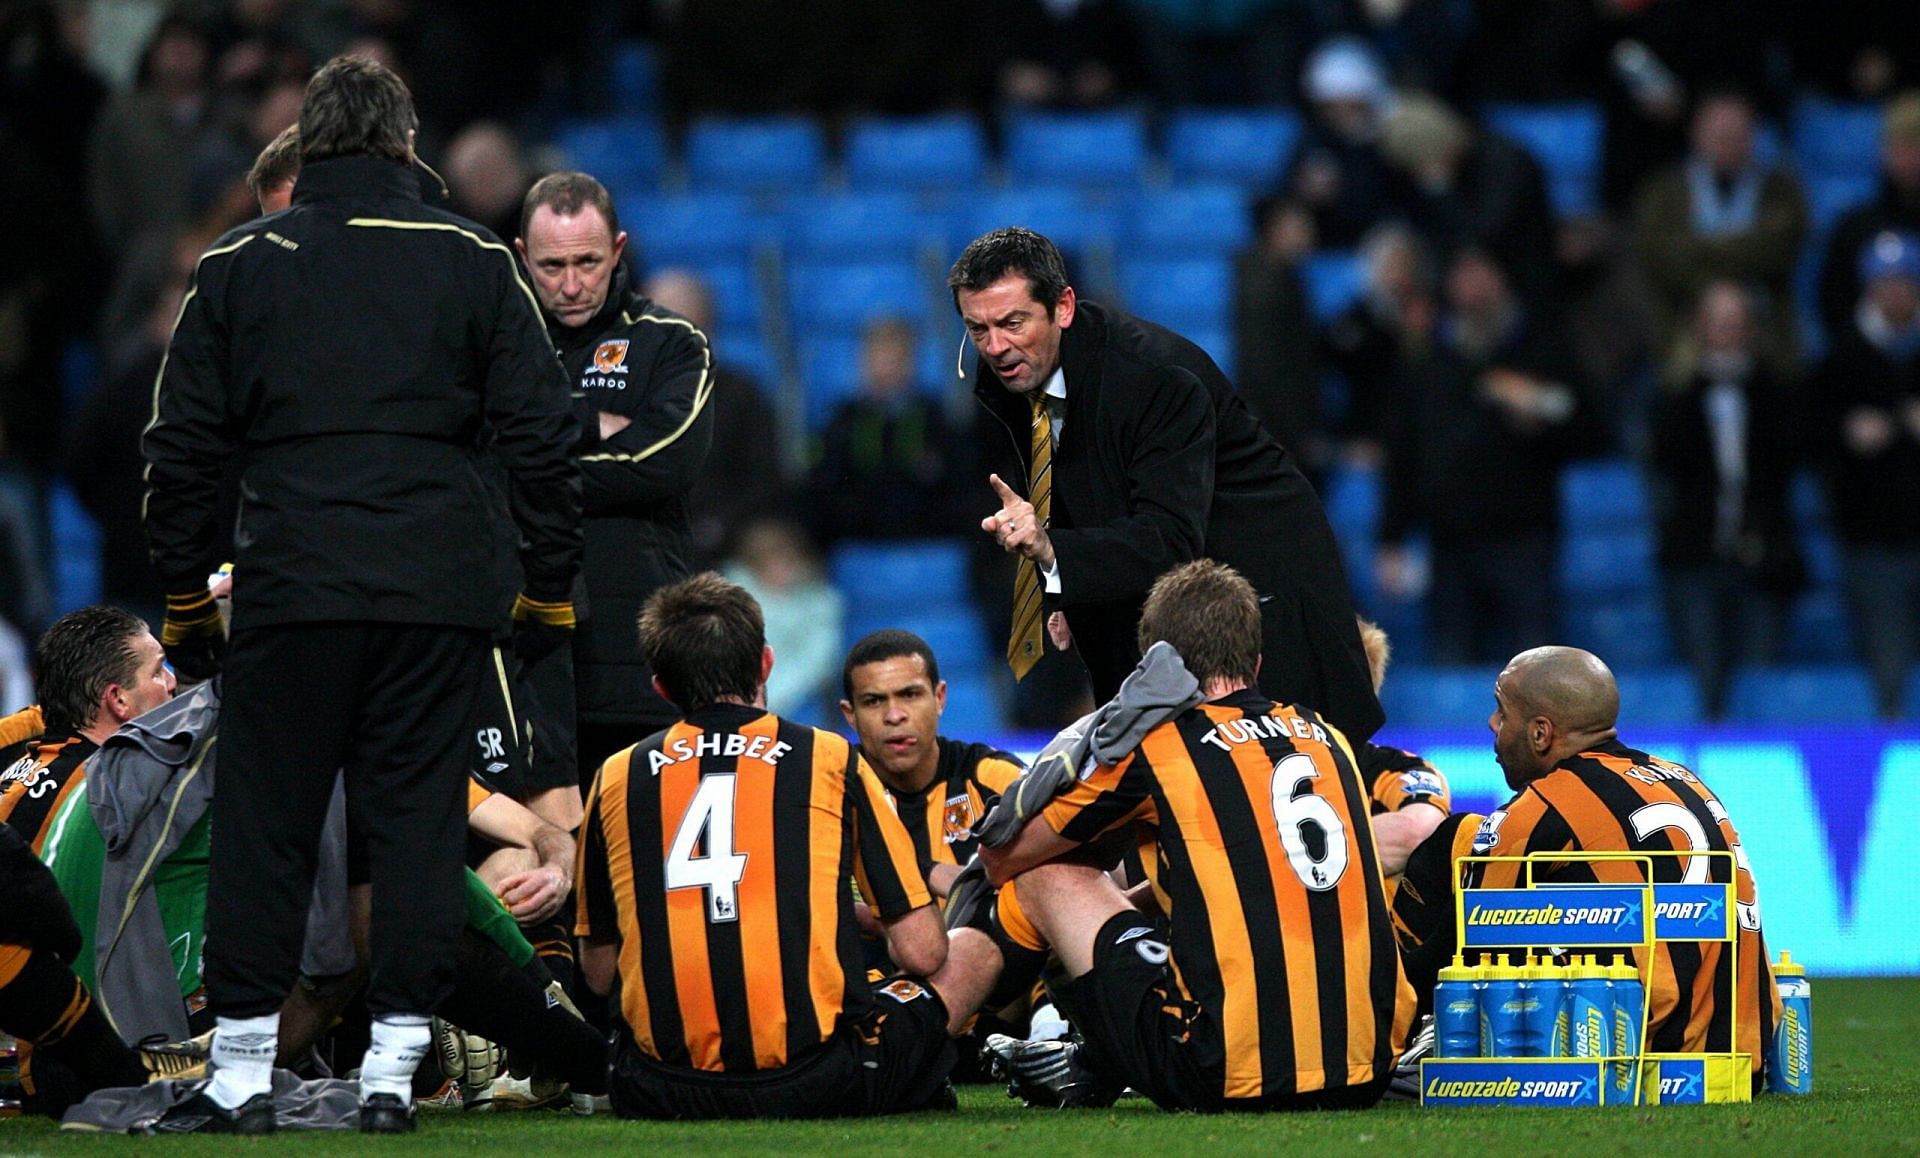 Former Hull City manager Phil Brown delivering his post-match team talk on the pitch.